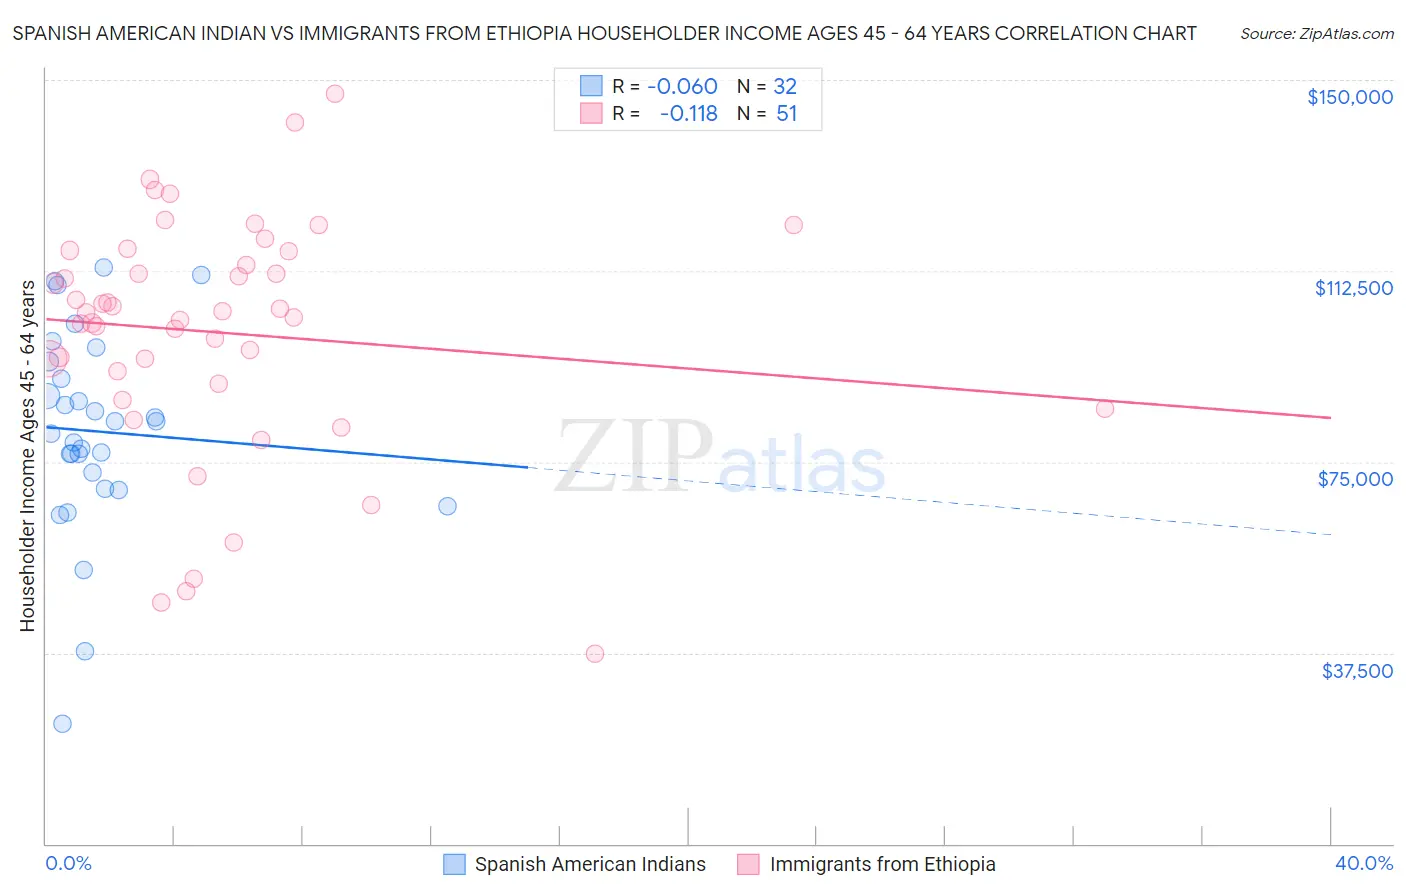 Spanish American Indian vs Immigrants from Ethiopia Householder Income Ages 45 - 64 years